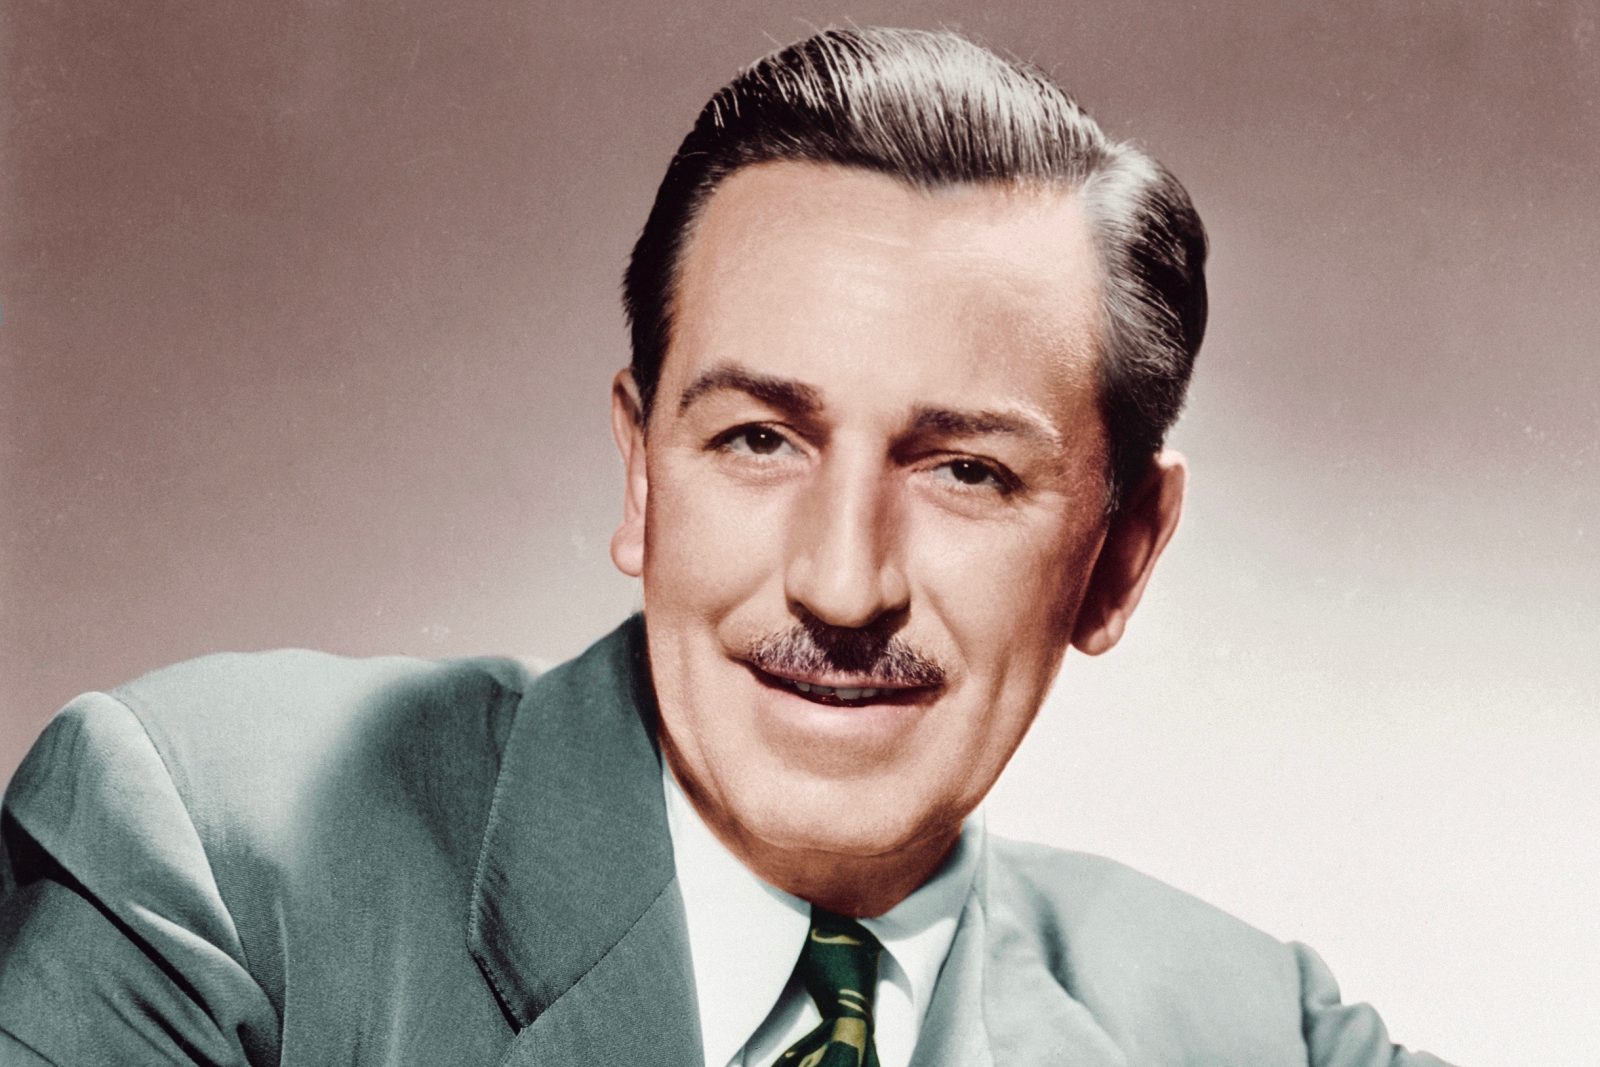 So You’re a Trivia Expert? Prove It by Answering All 22 of These True/False Questions Correctly Walter Elias Disney